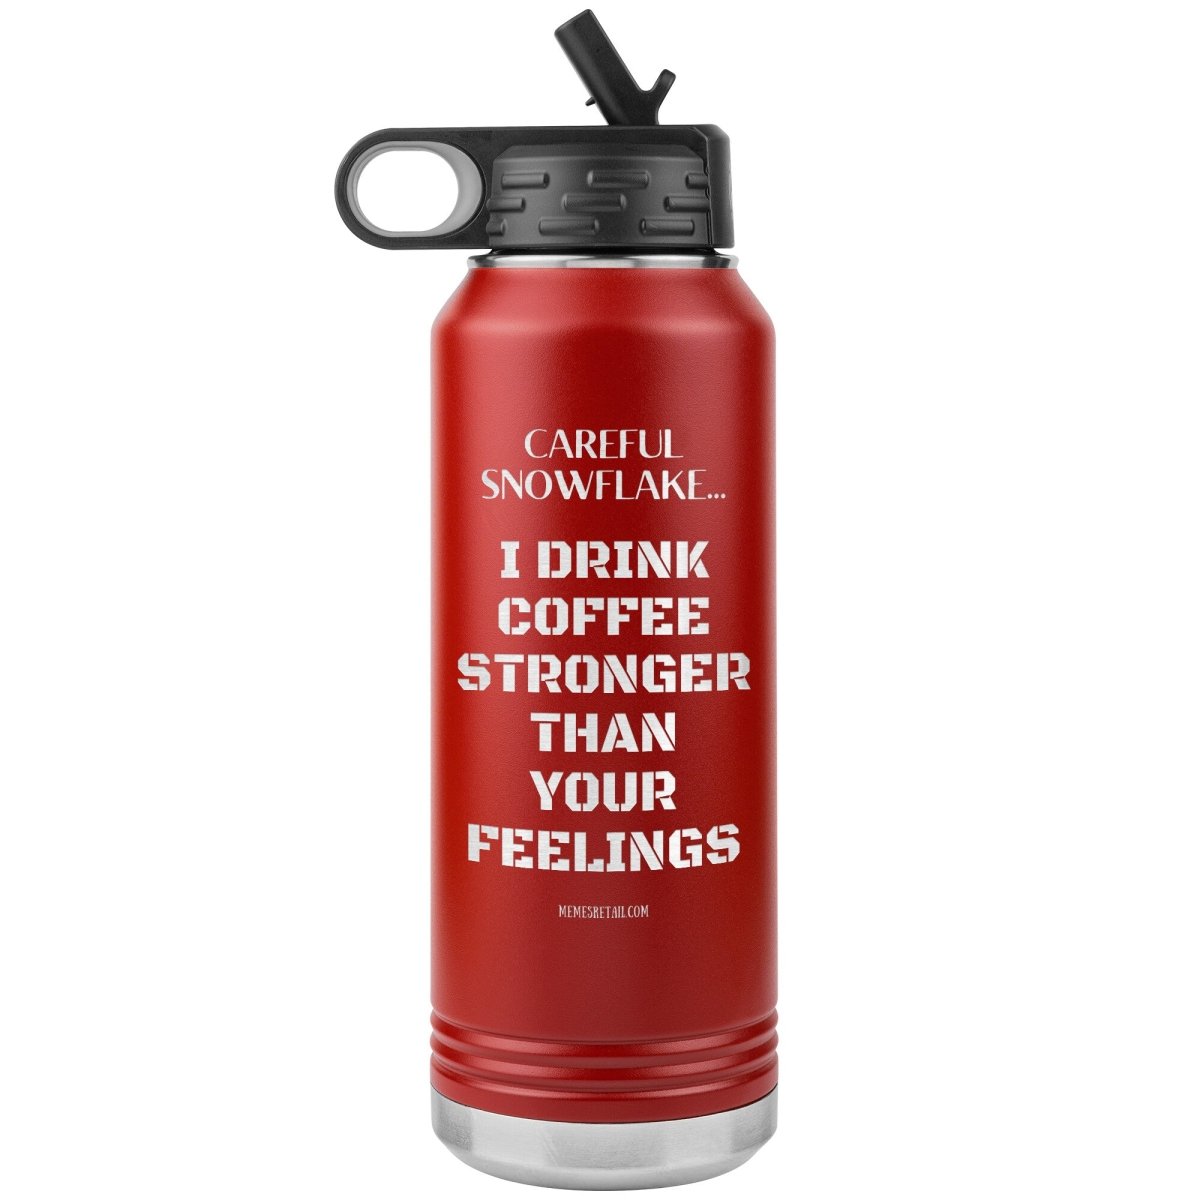 Careful Snowflake... I Drink Coffee Stronger Than Your Feelings 32 oz Water Bottle, Red - MemesRetail.com